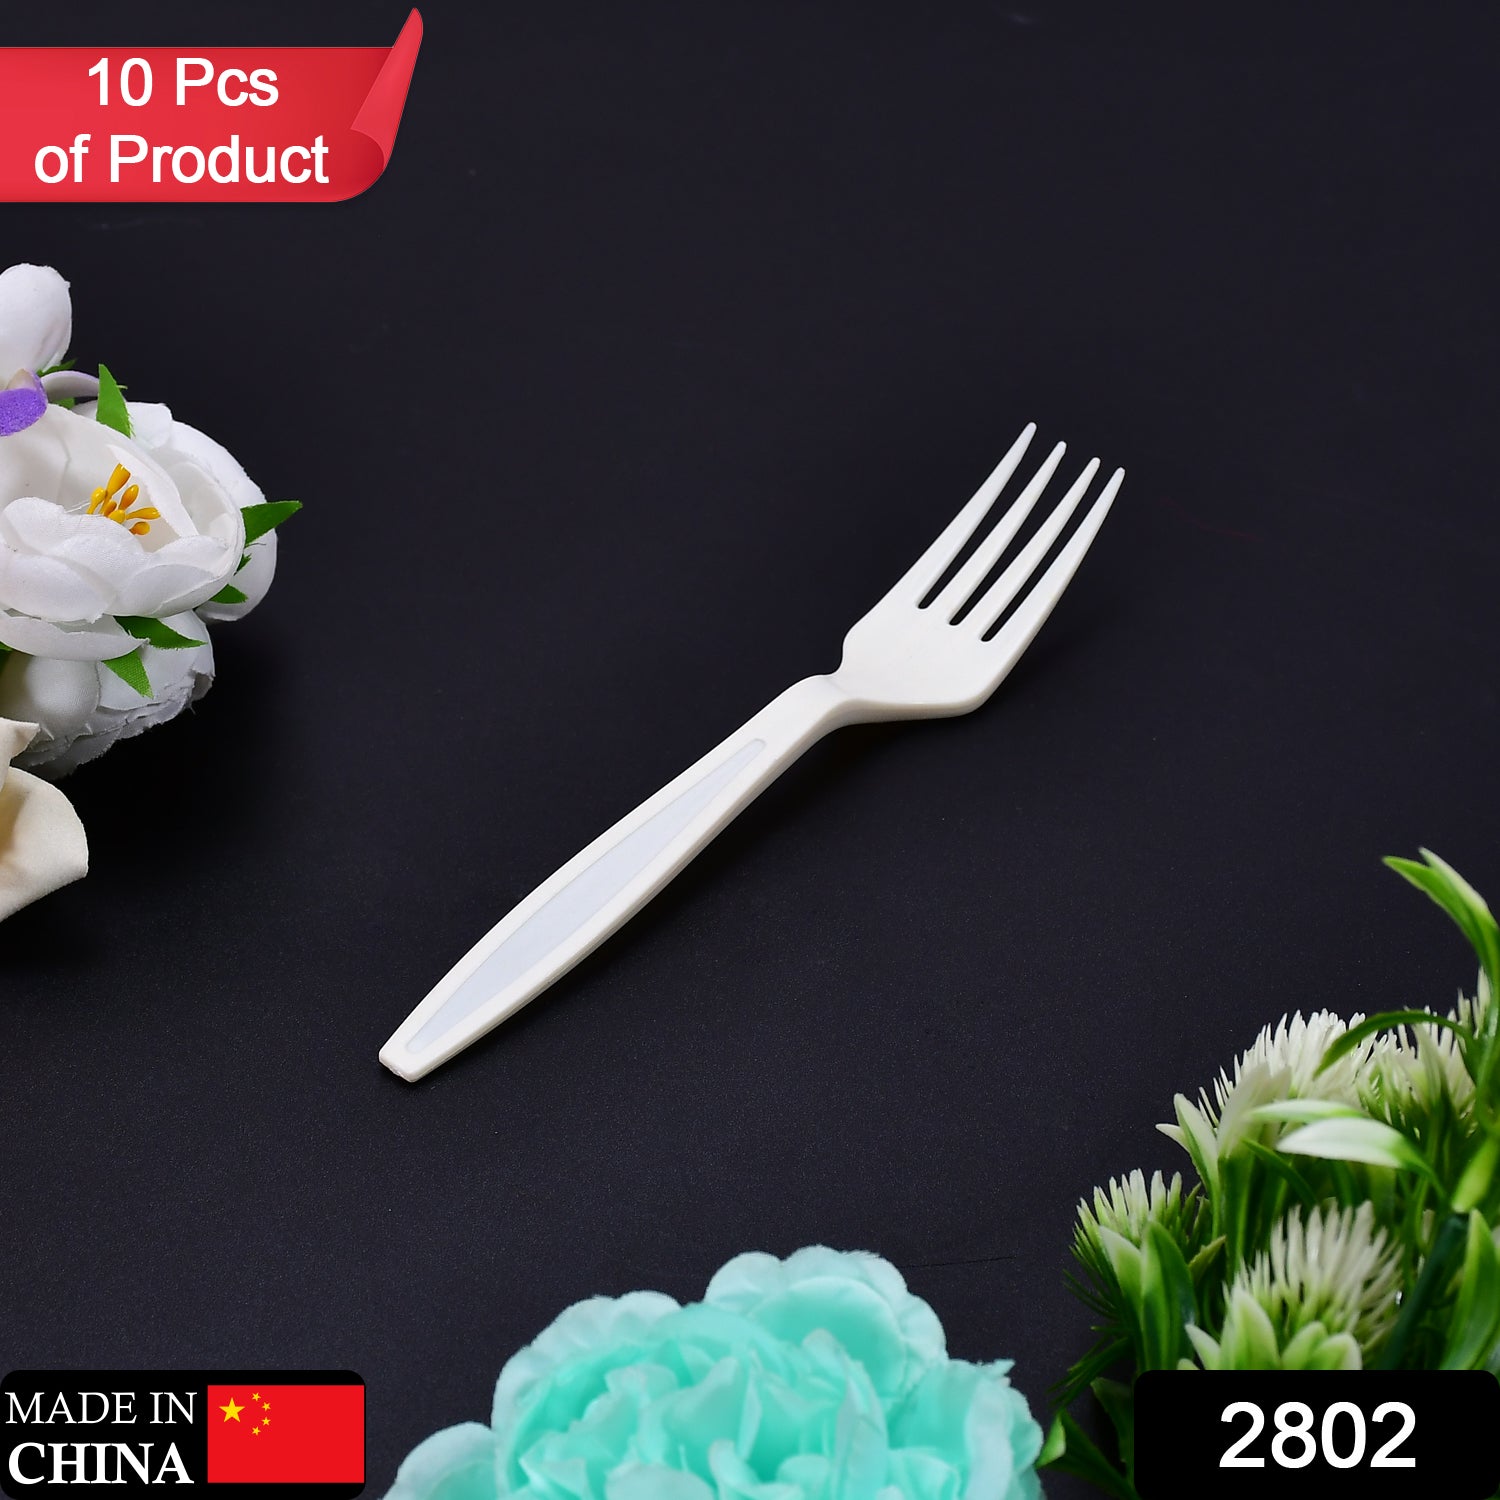 2802 Small plastic 10pc Serving Fork Set for kitchen DeoDap